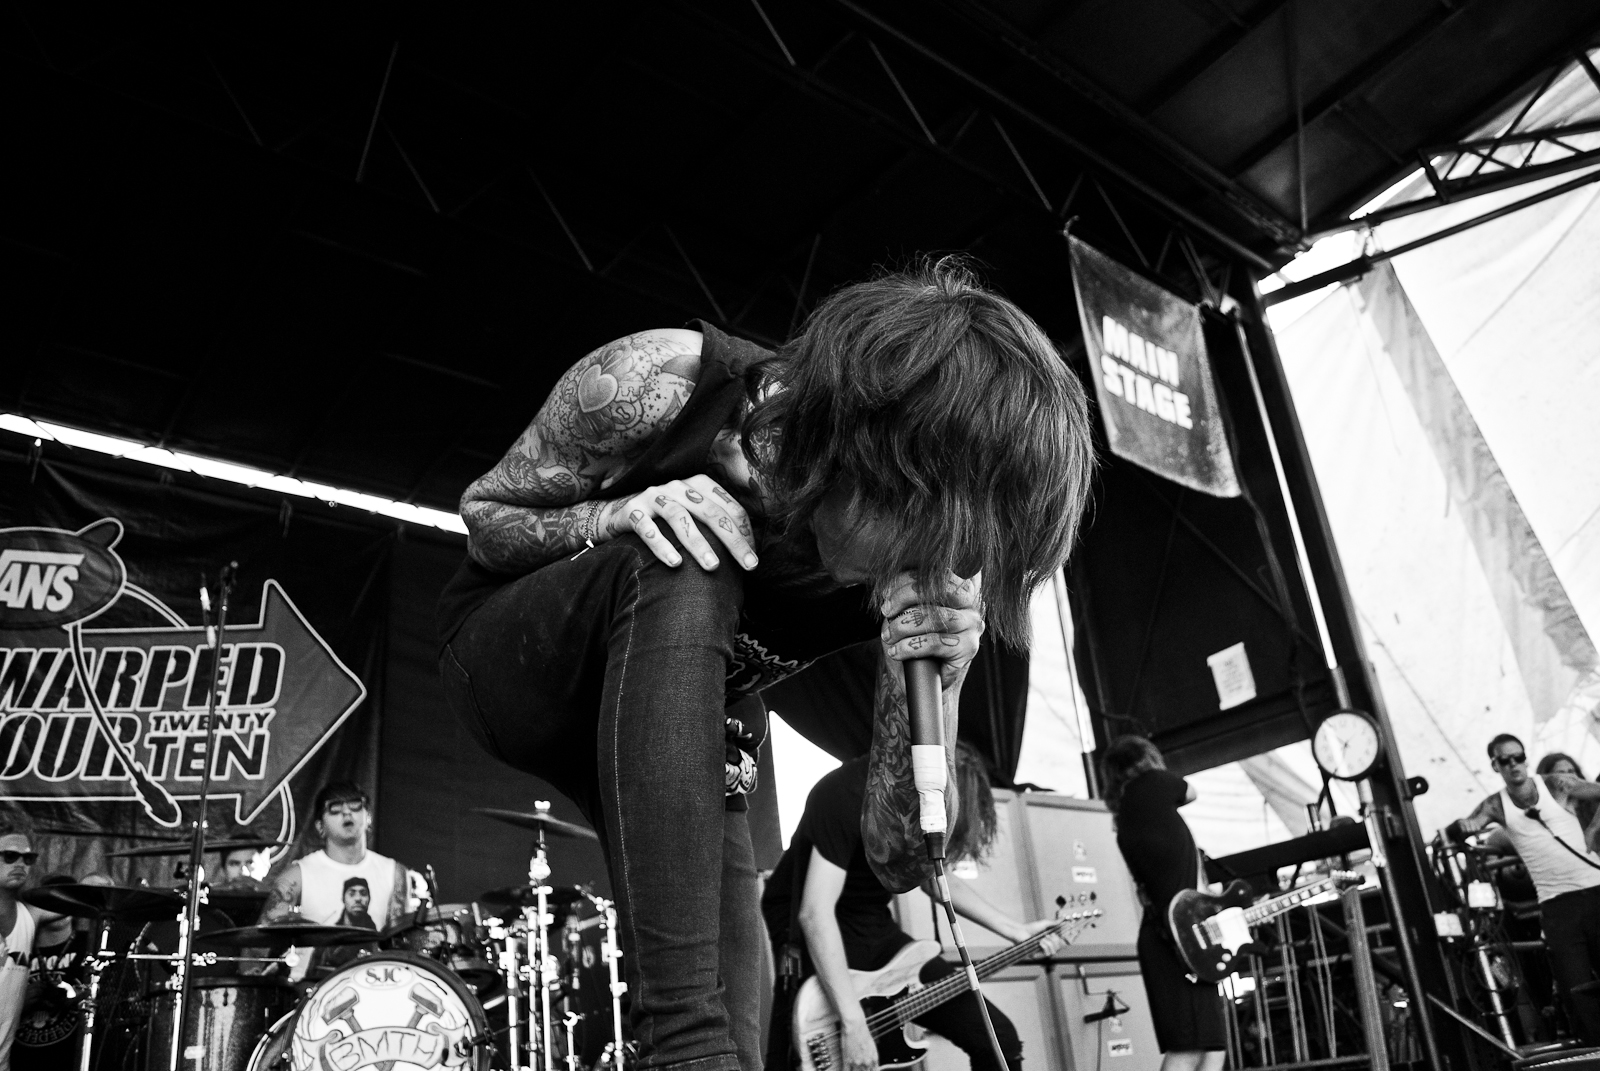 Bring Me The Horizon Bmth HD Wallpaper In